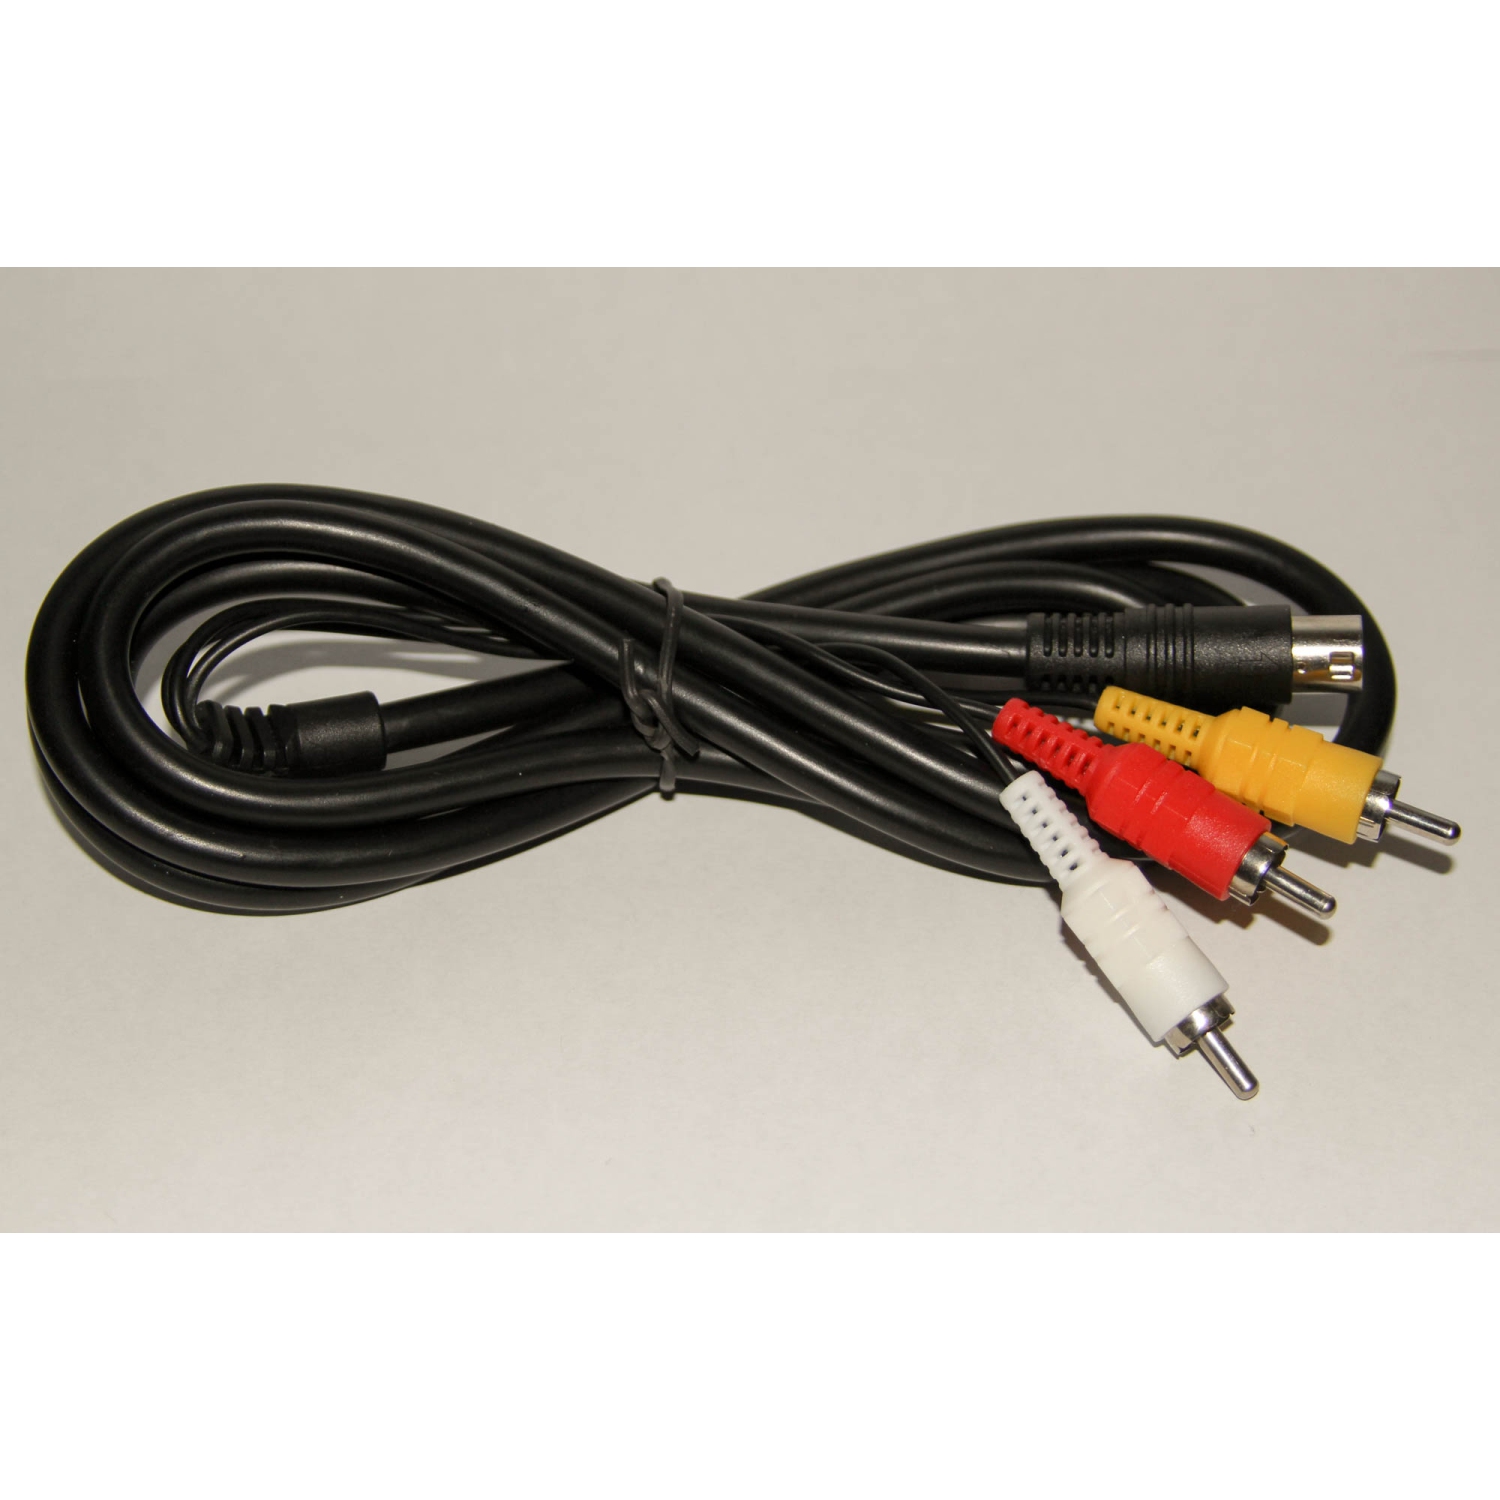 RCA AV Cable for Sega Genesis 2 and 3 by Mars Devices